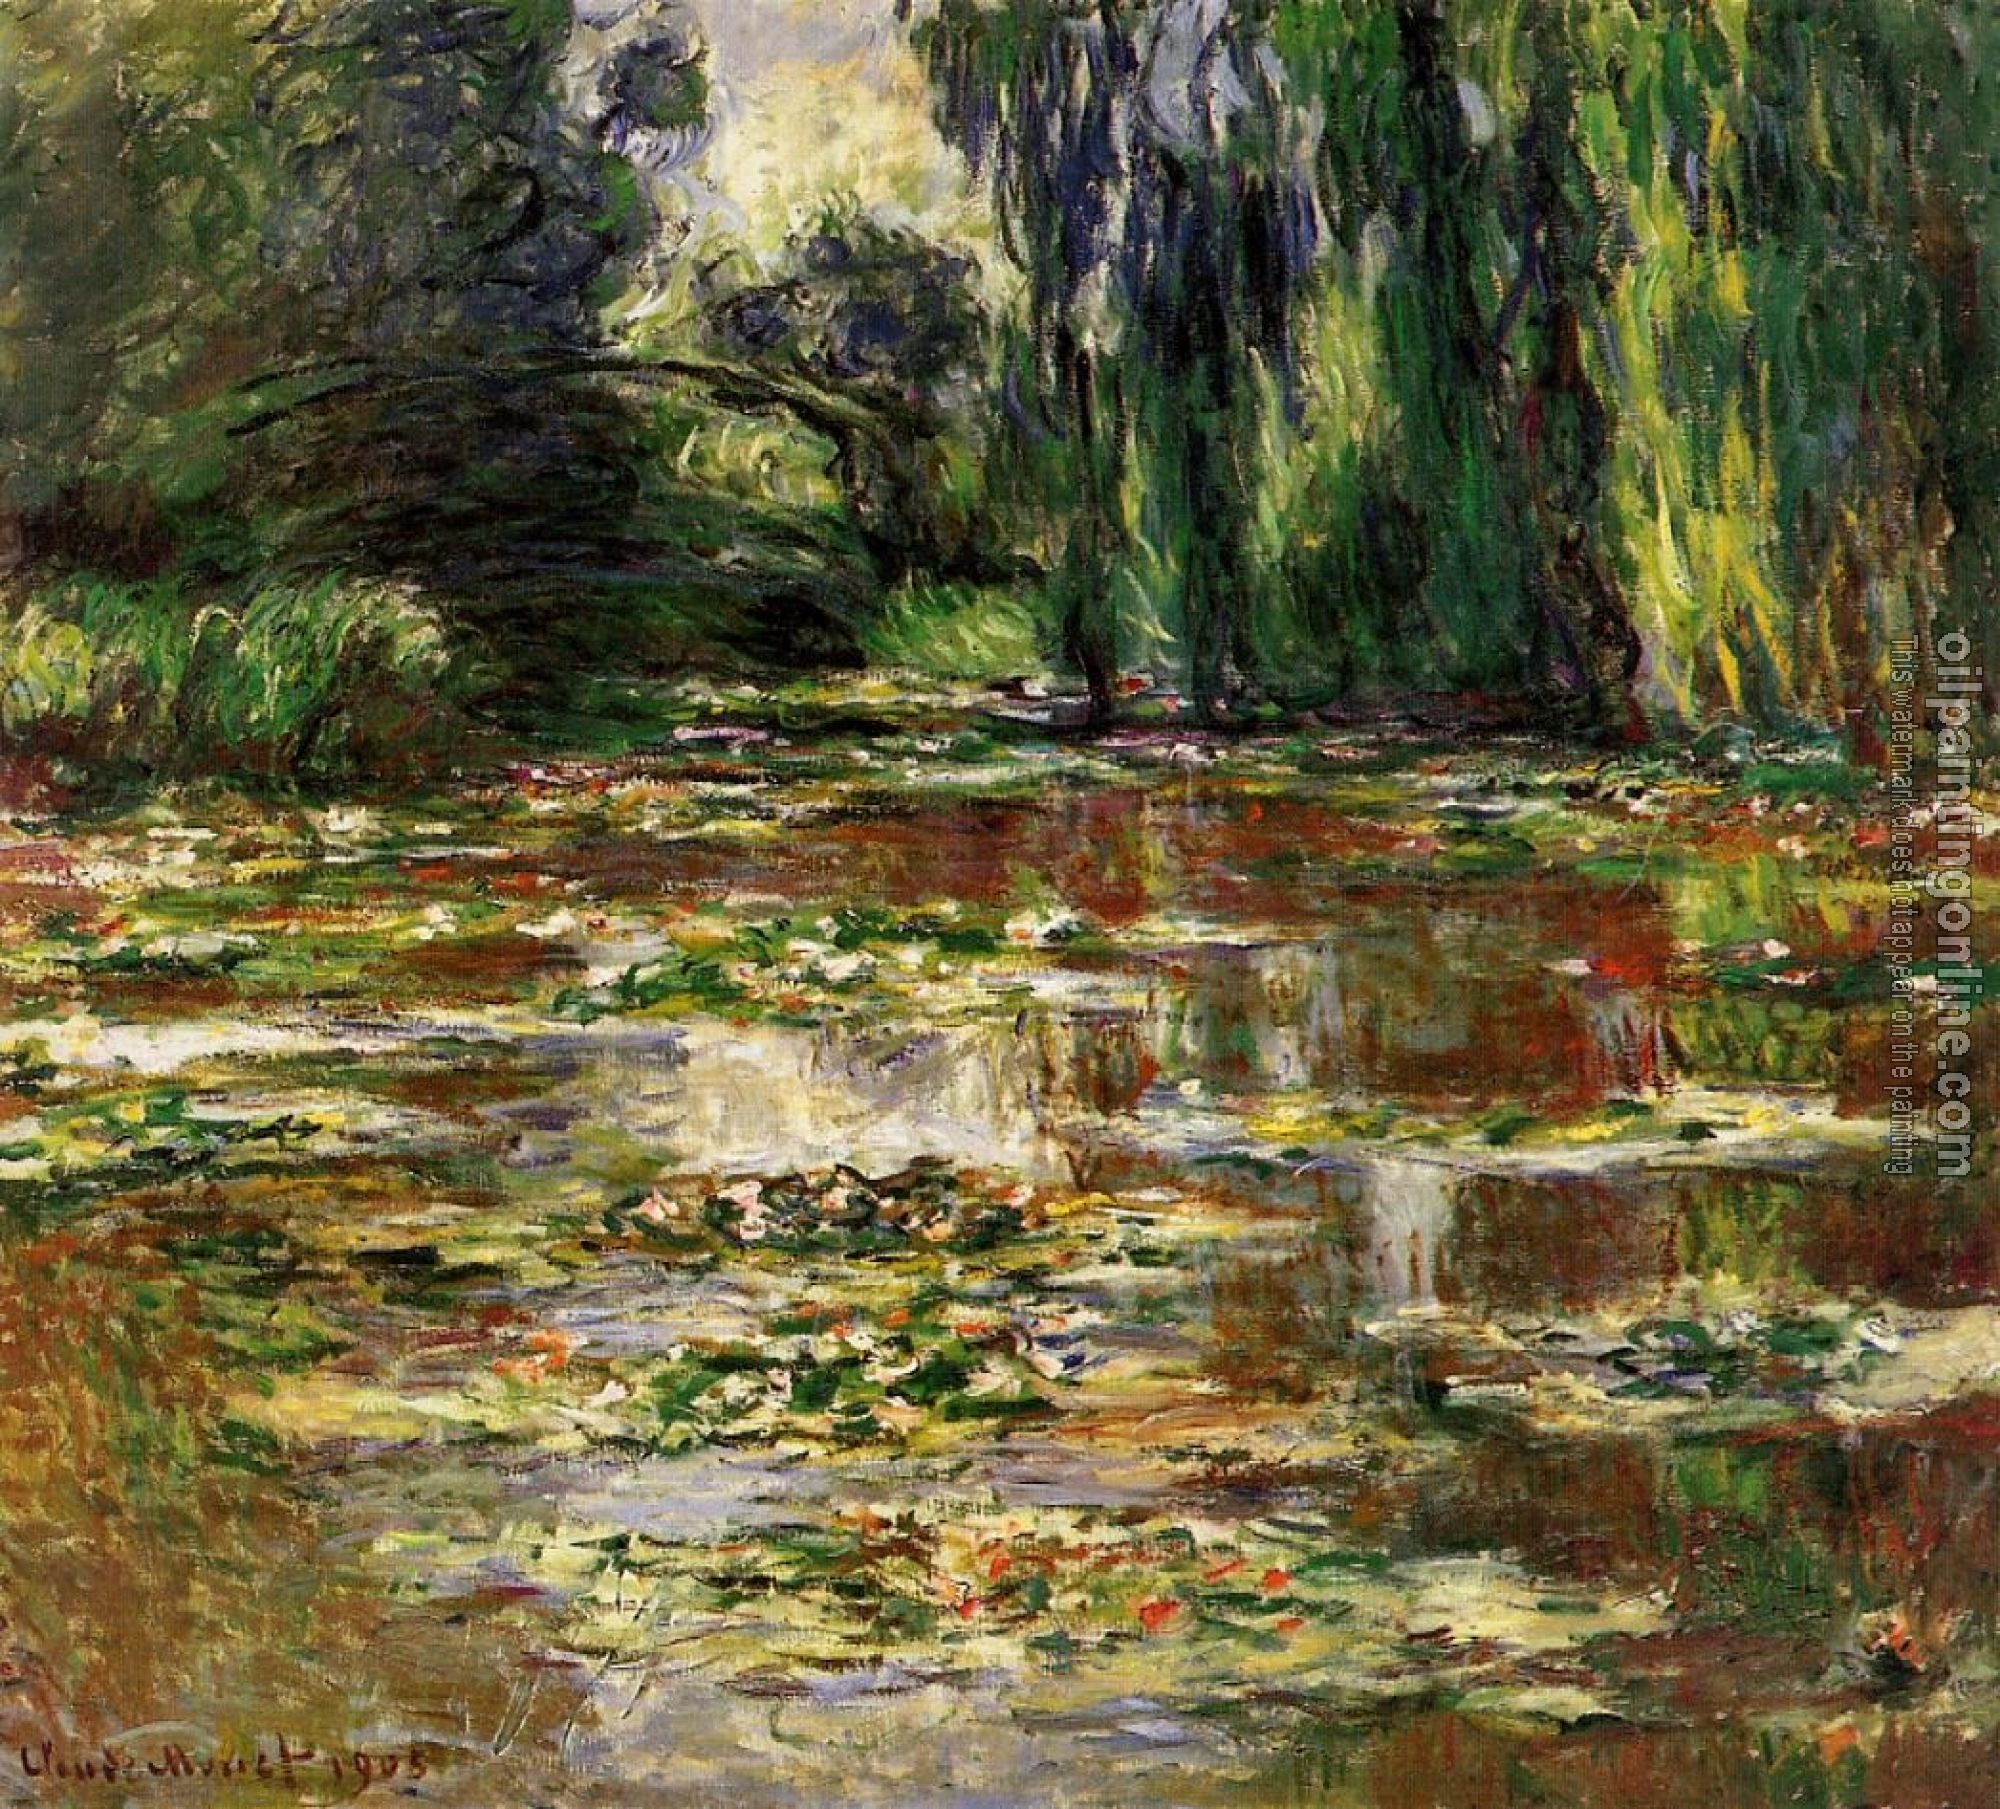 Monet, Claude Oscar - The Bridge over the Water-Lily Pond